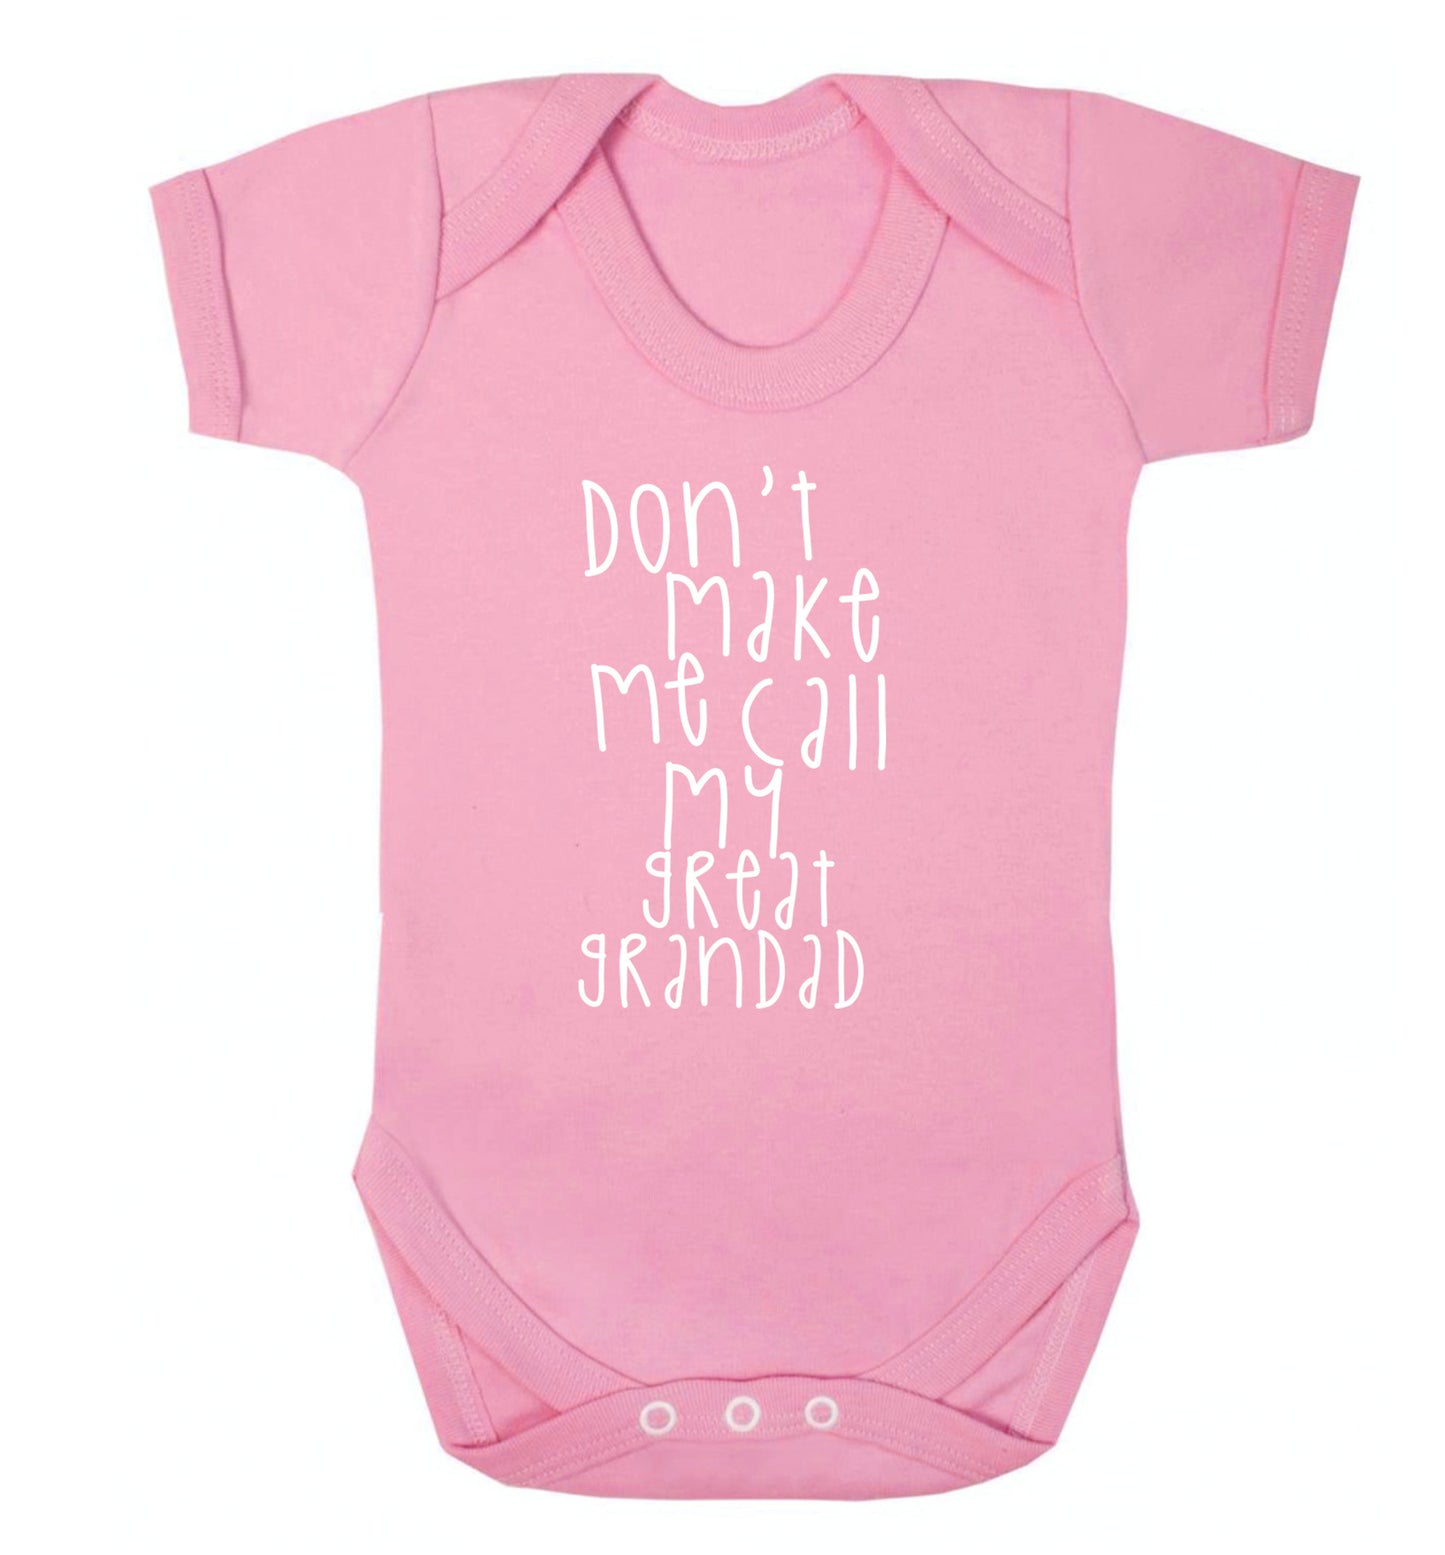 Don't make me call my great grandad Baby Vest pale pink 18-24 months